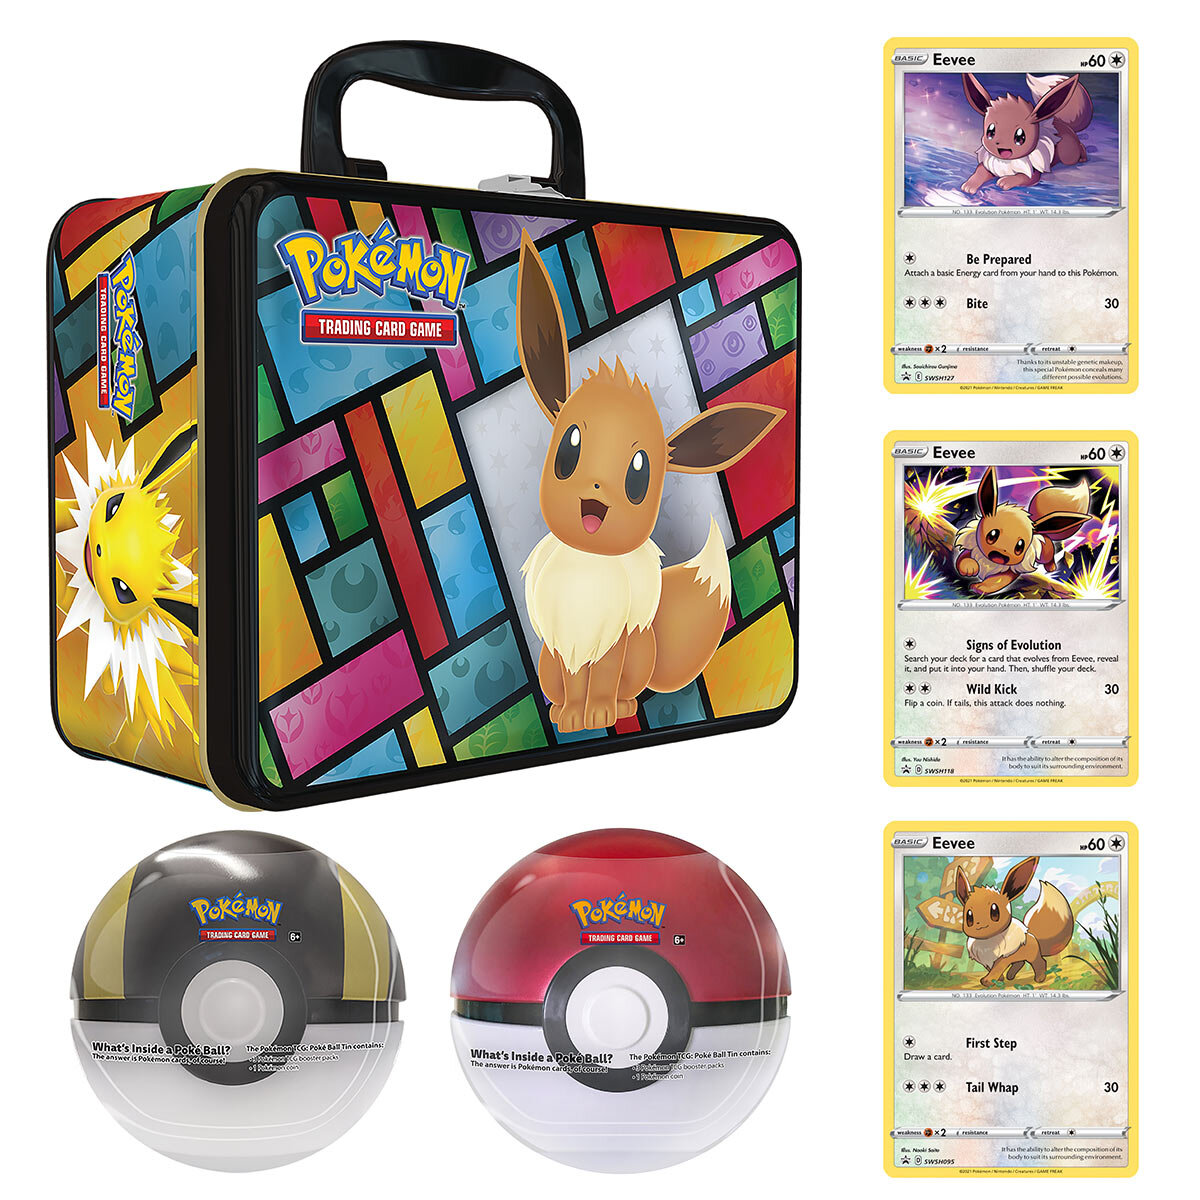 Buy Pokemon Collectors Chest & 2 Pokeballs Combined Included Image at Costco.co.uk